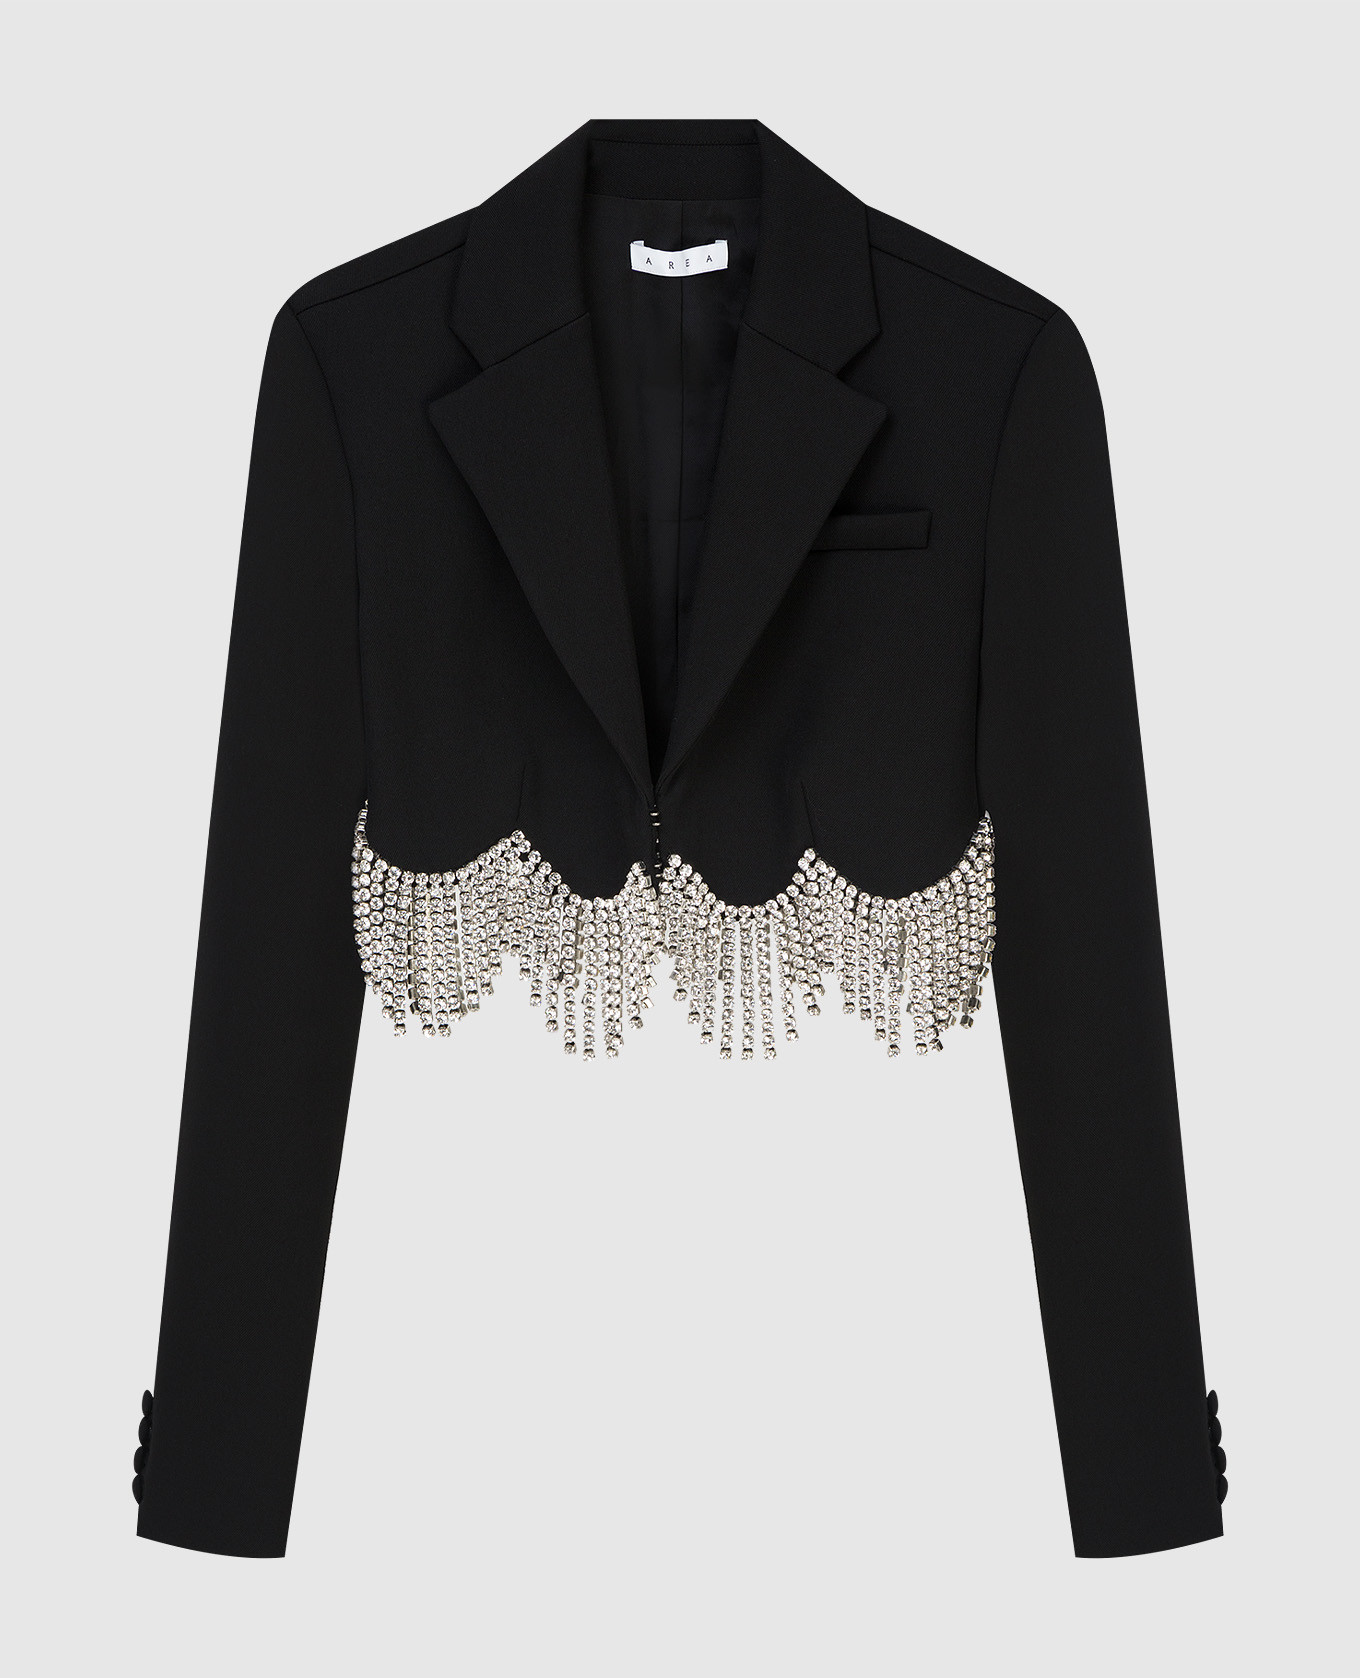 Black wool jacket with crystals